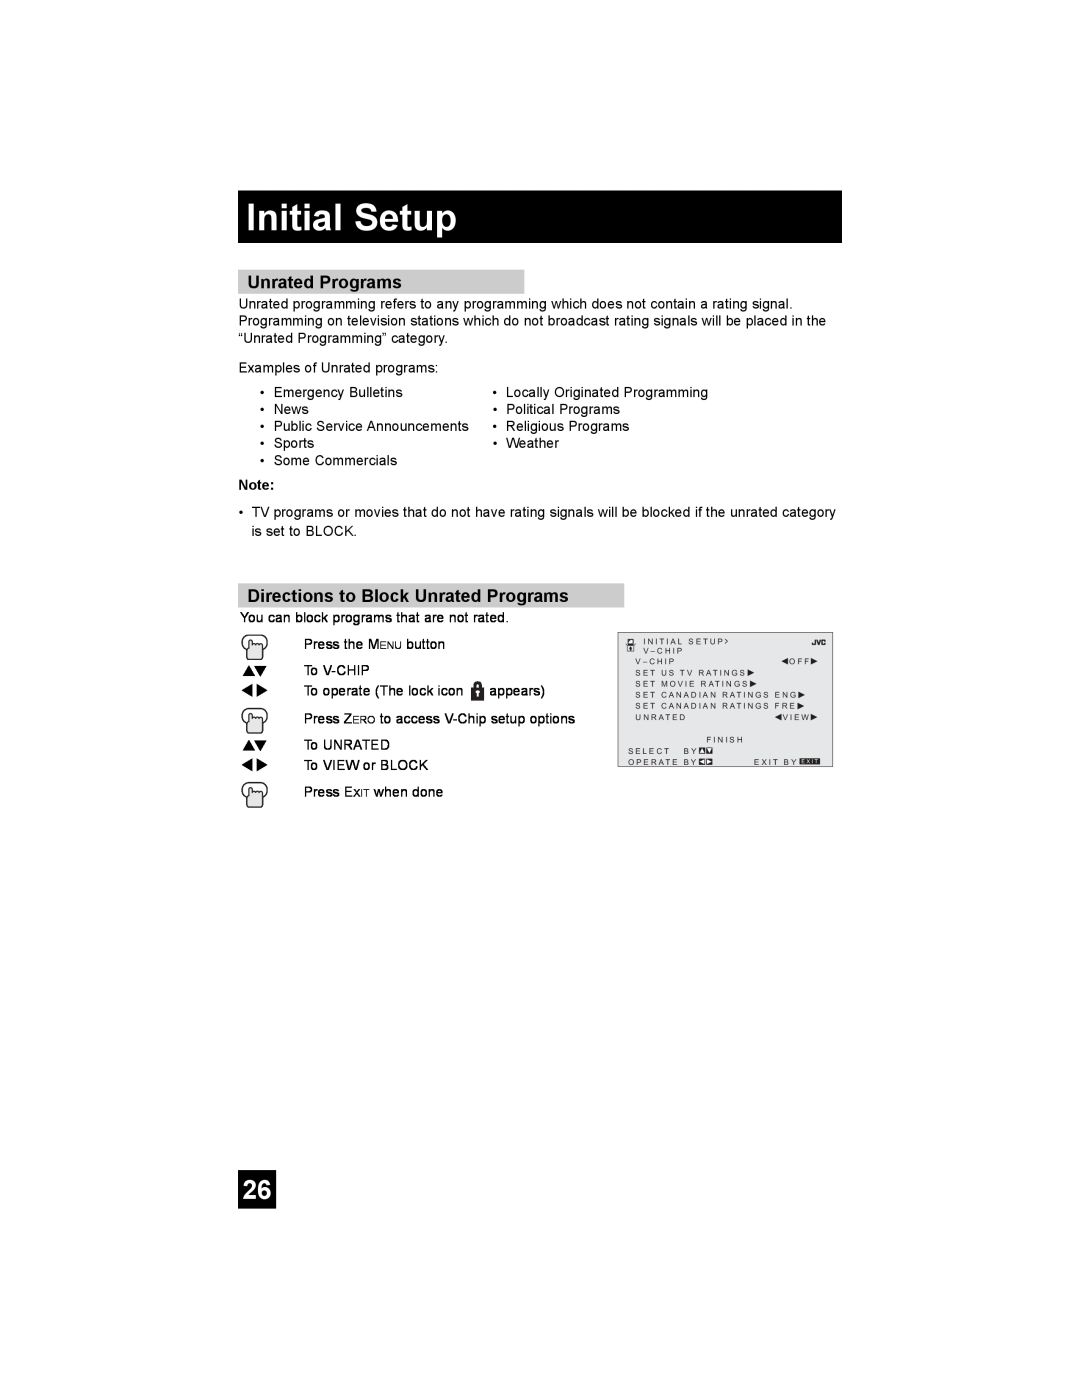 JVC AV 20FA44 manual Directions to Block Unrated Programs, Initial Setup 